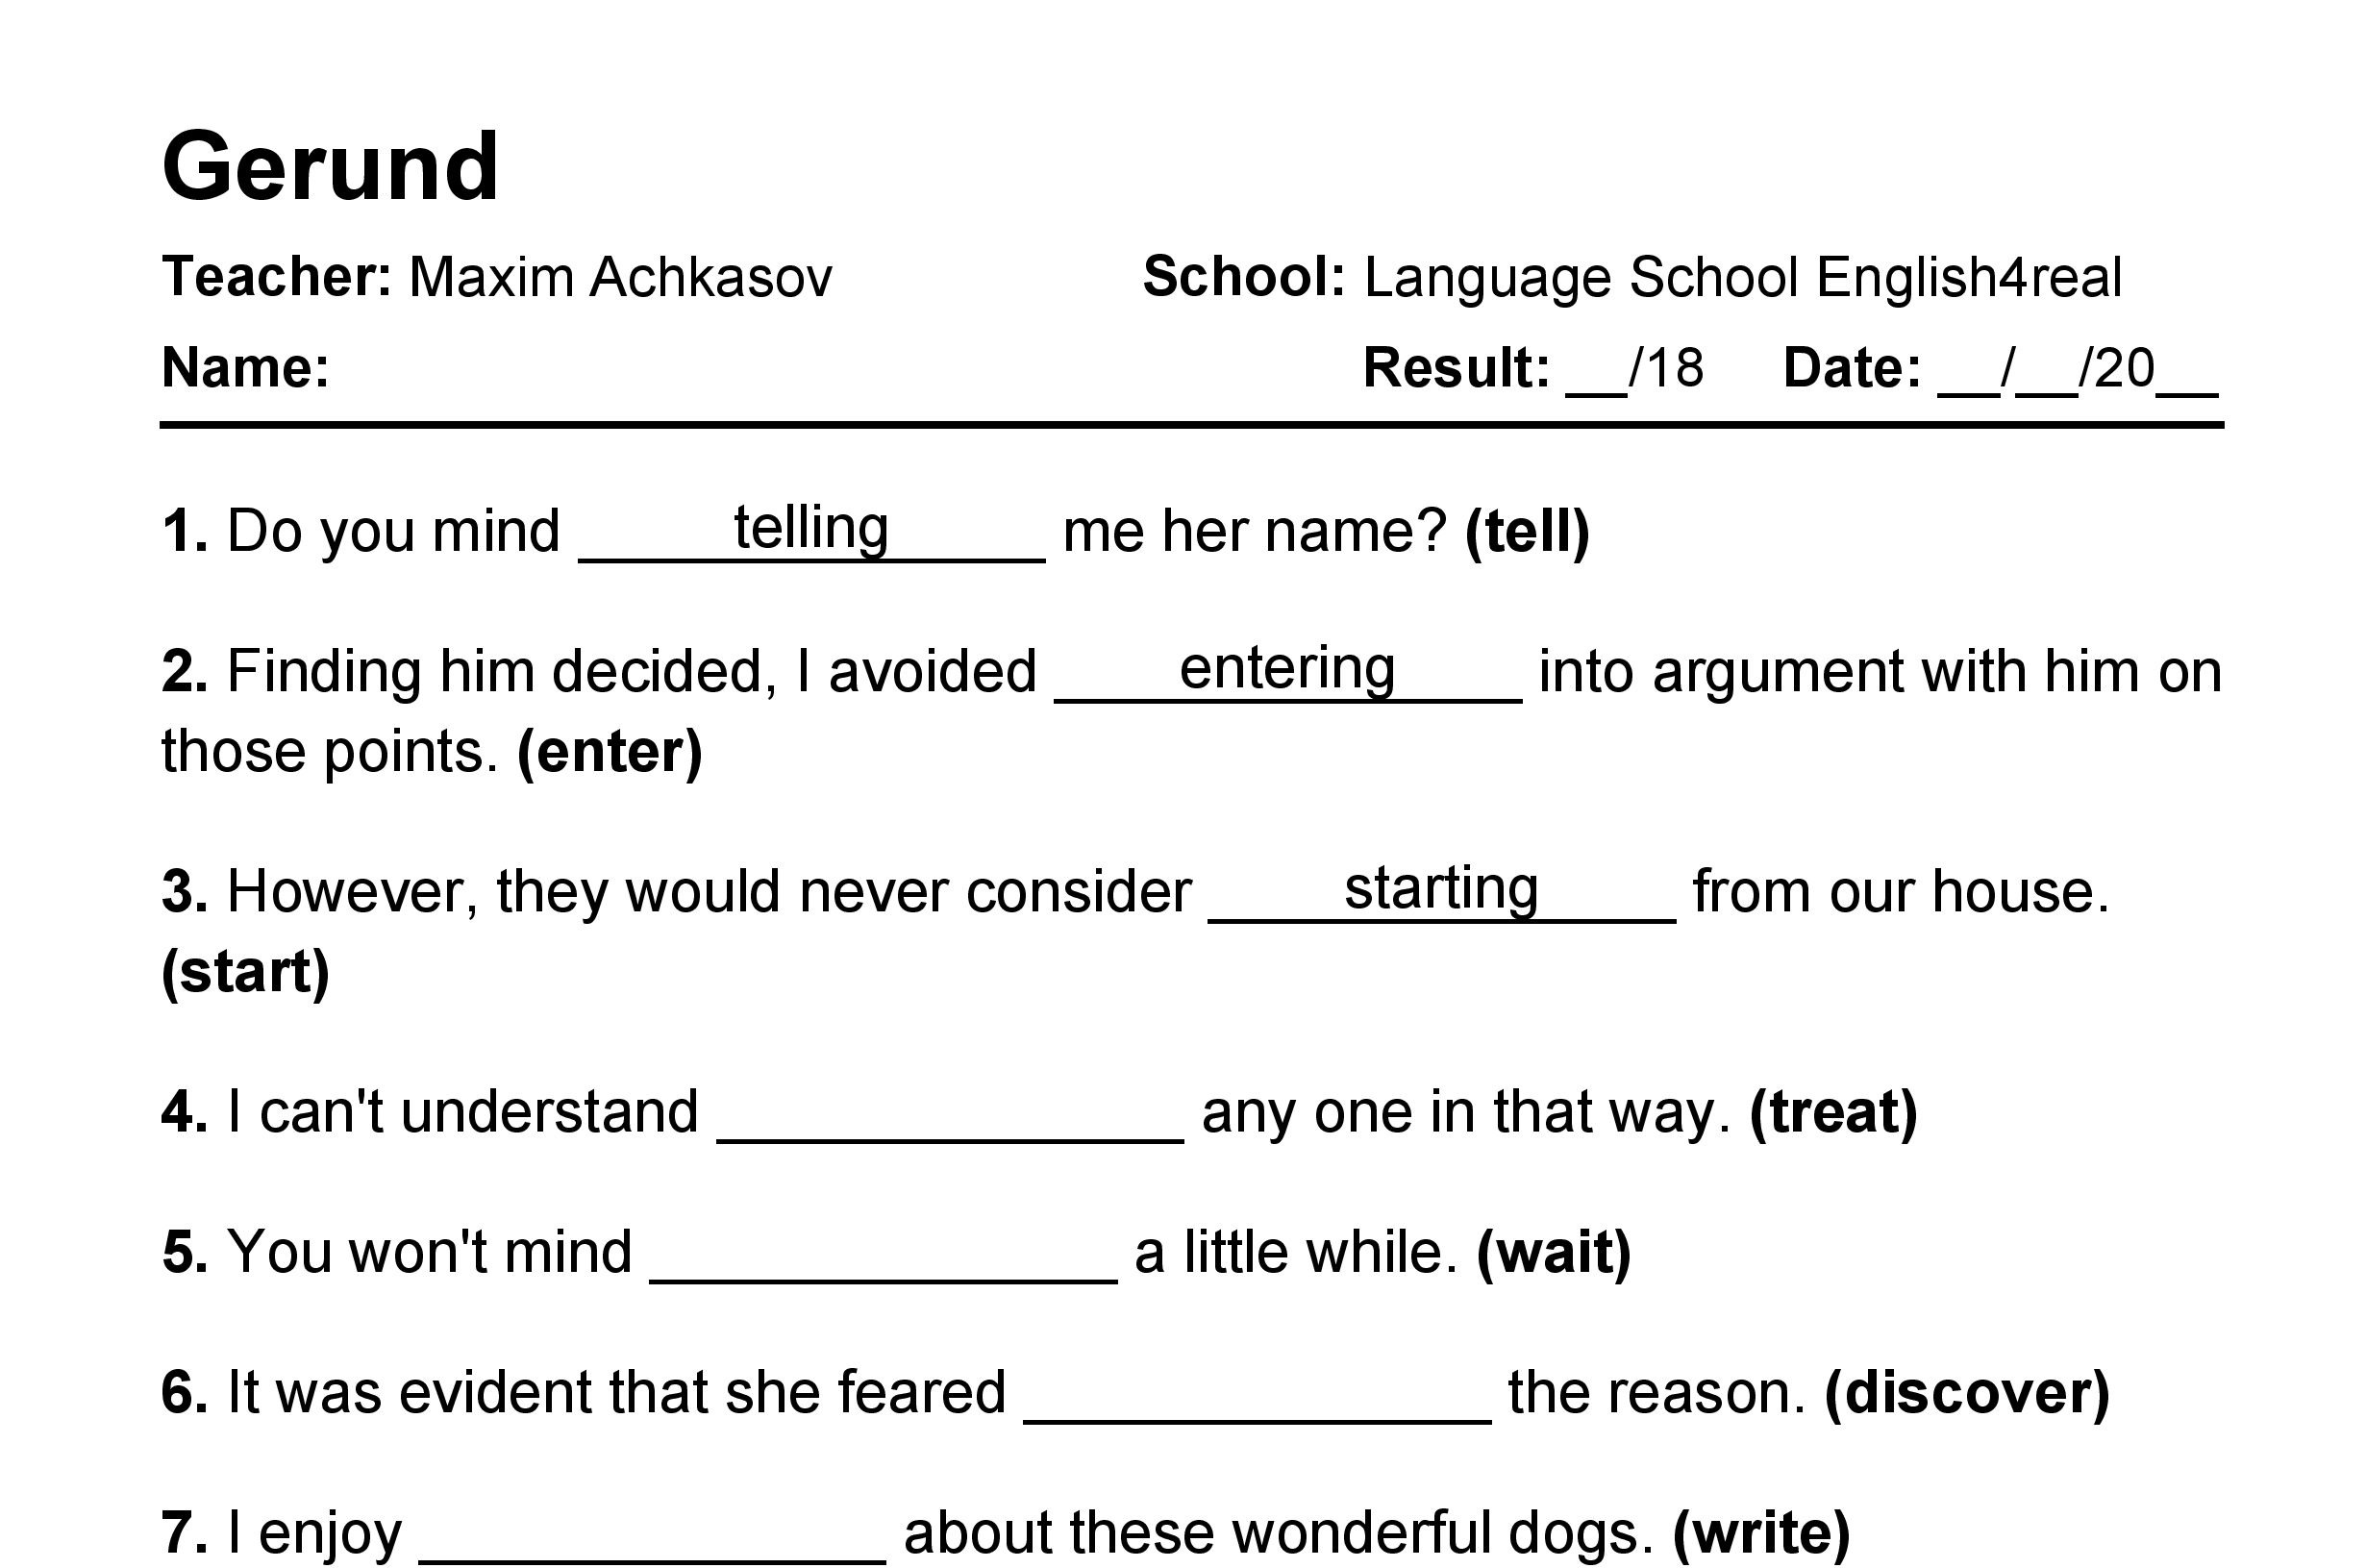 English grammar fill in the blanks exercises with answers in PDF - Gerund